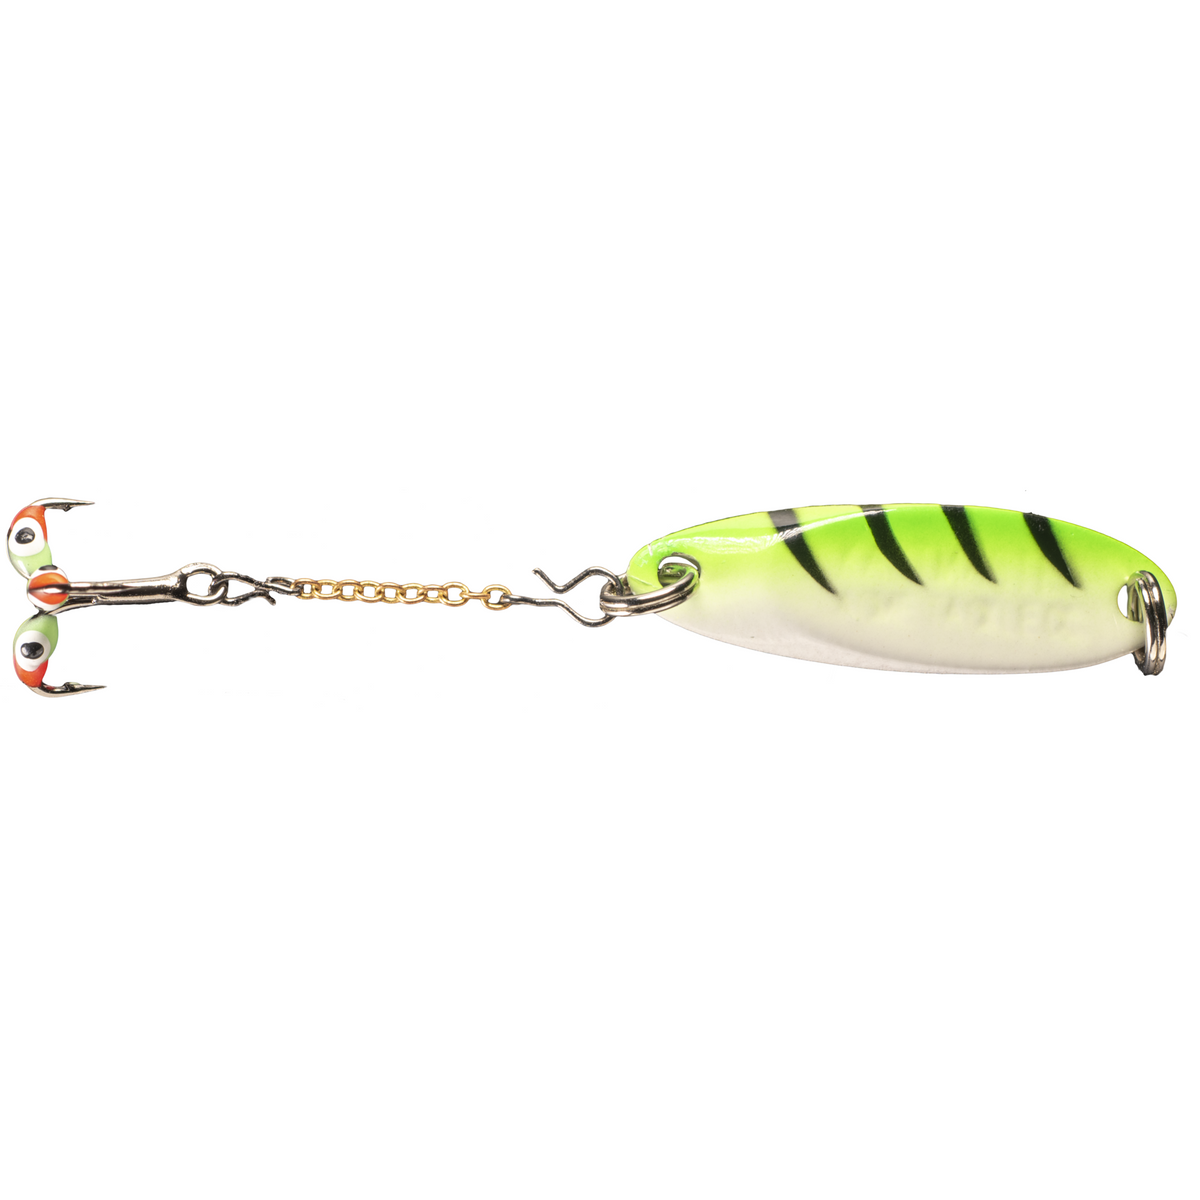 🌟 Acme Kastmaster Glow RED & GOLD Body 1/12 oz Spoon Fishing Lure  (SW225T/GGLR)